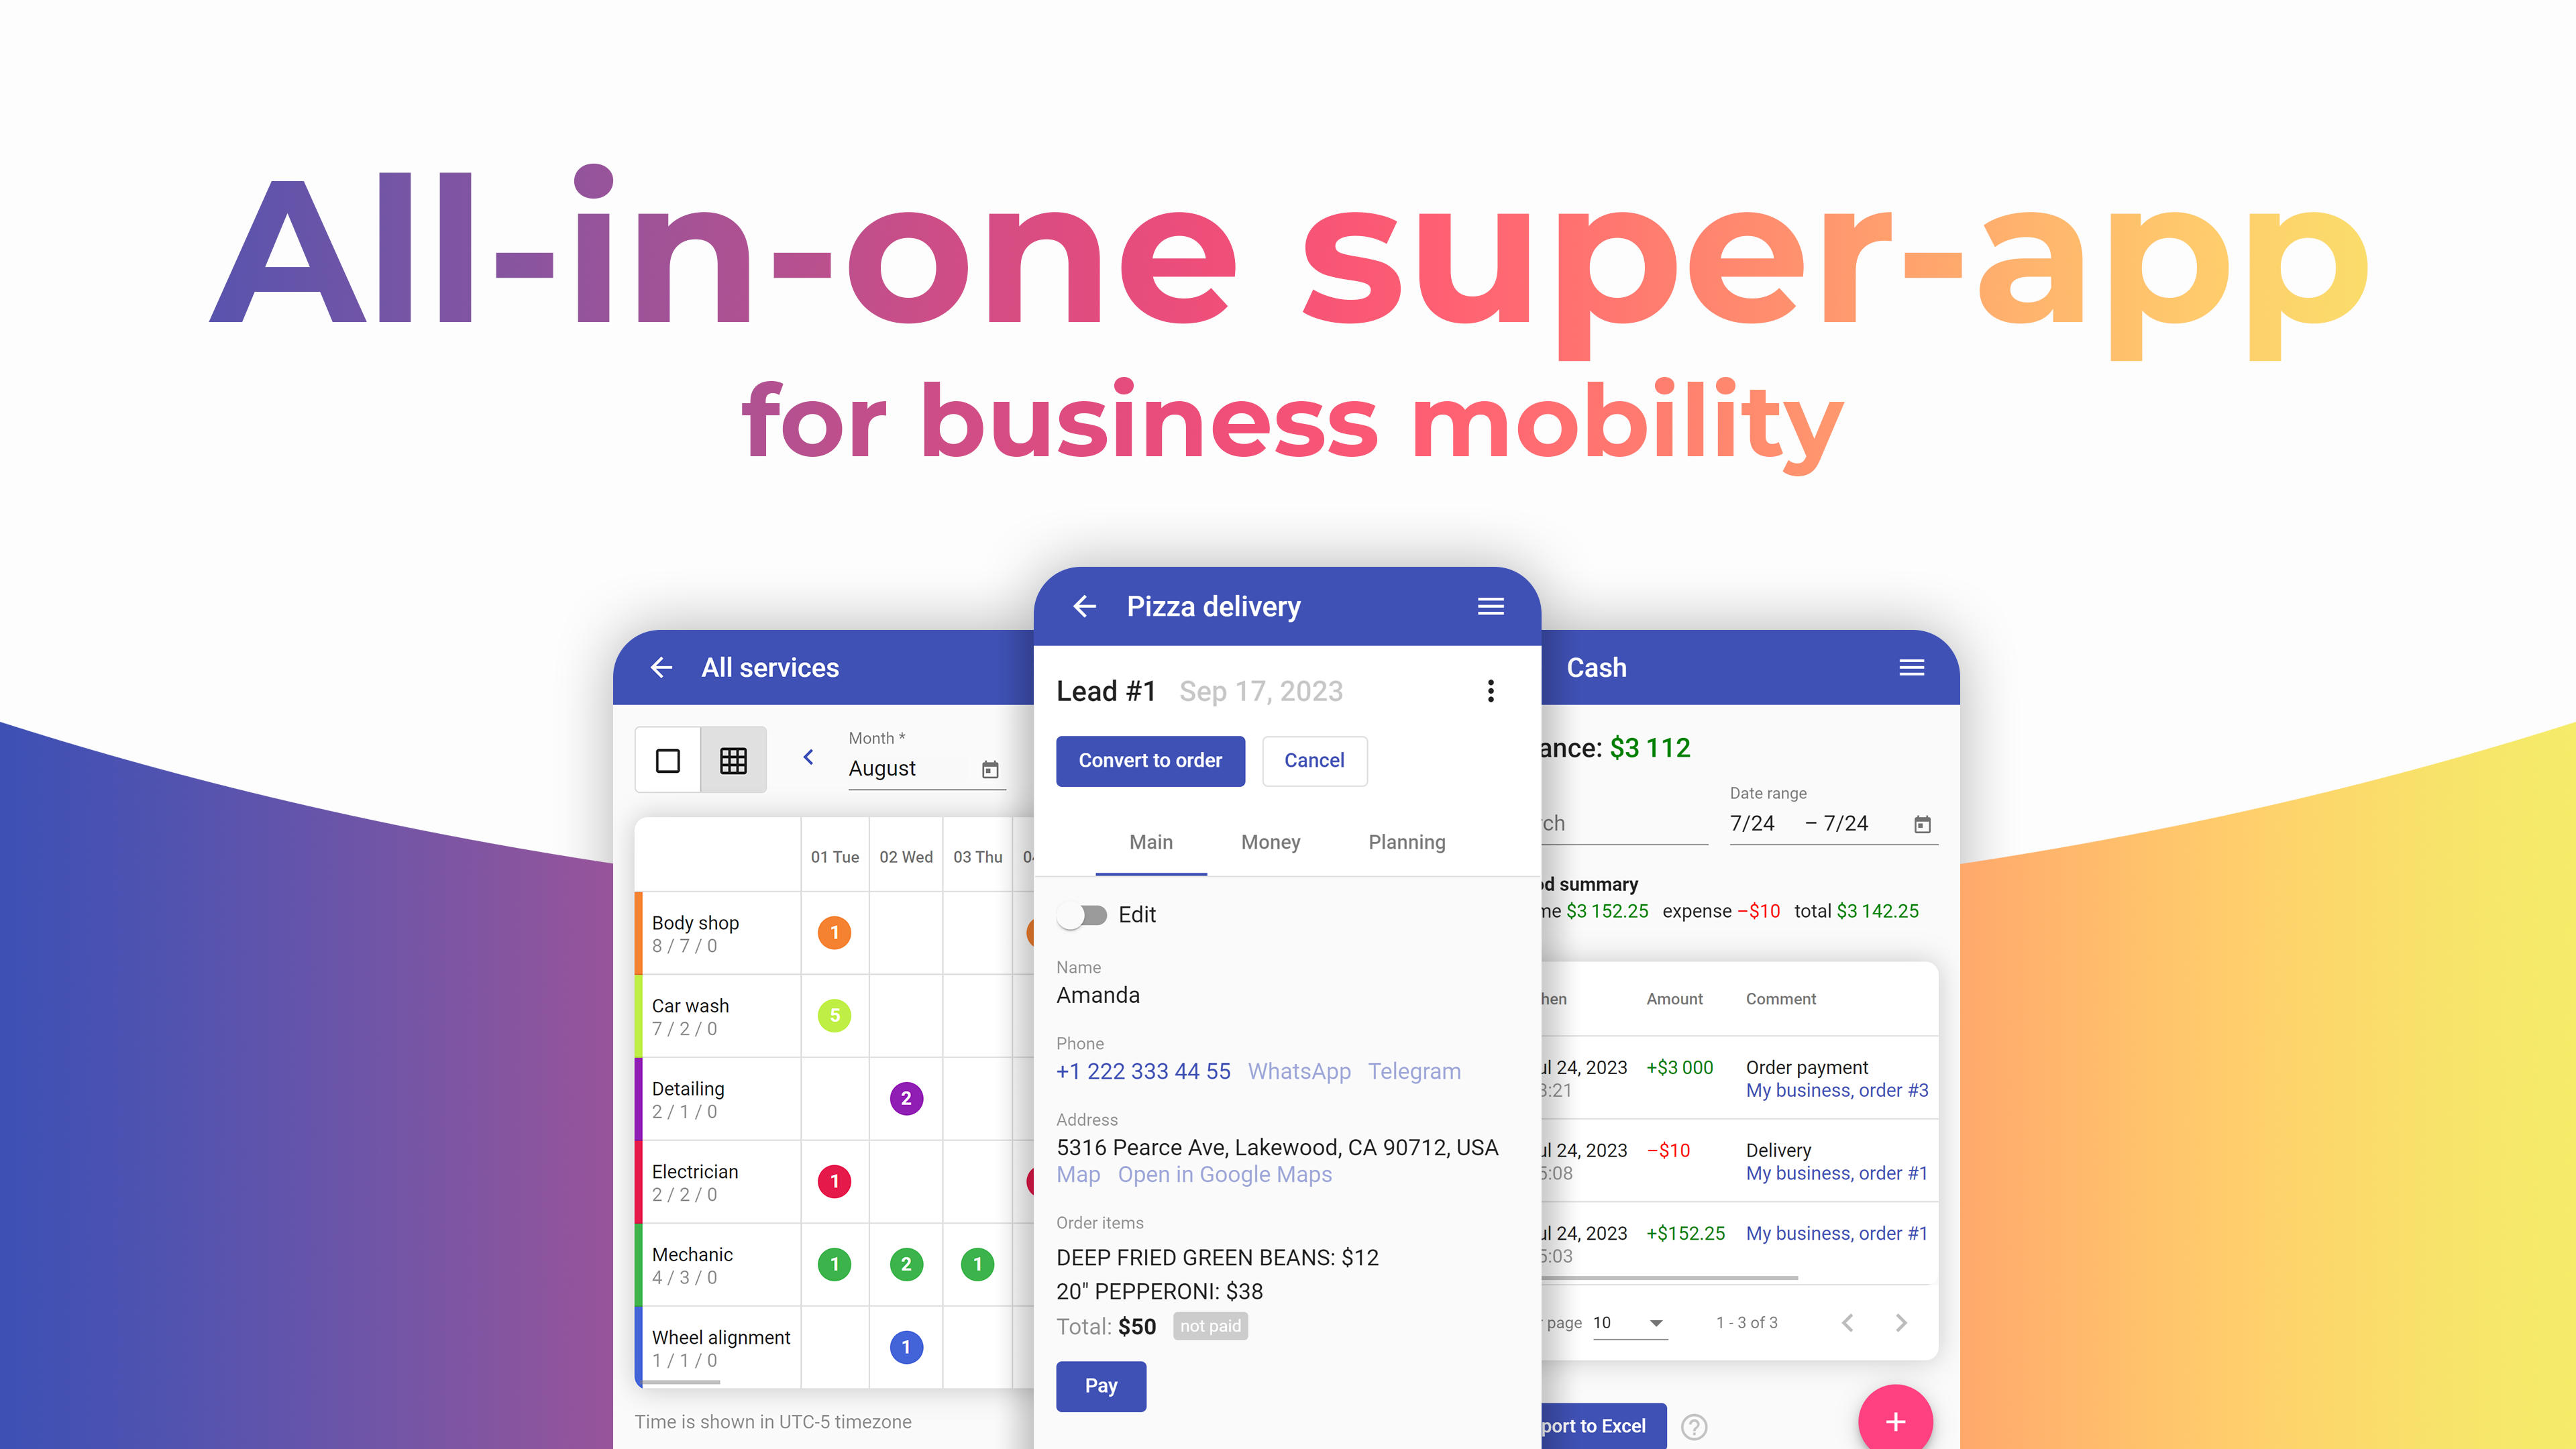 Upp All-in-one super-app for small business and self-employed